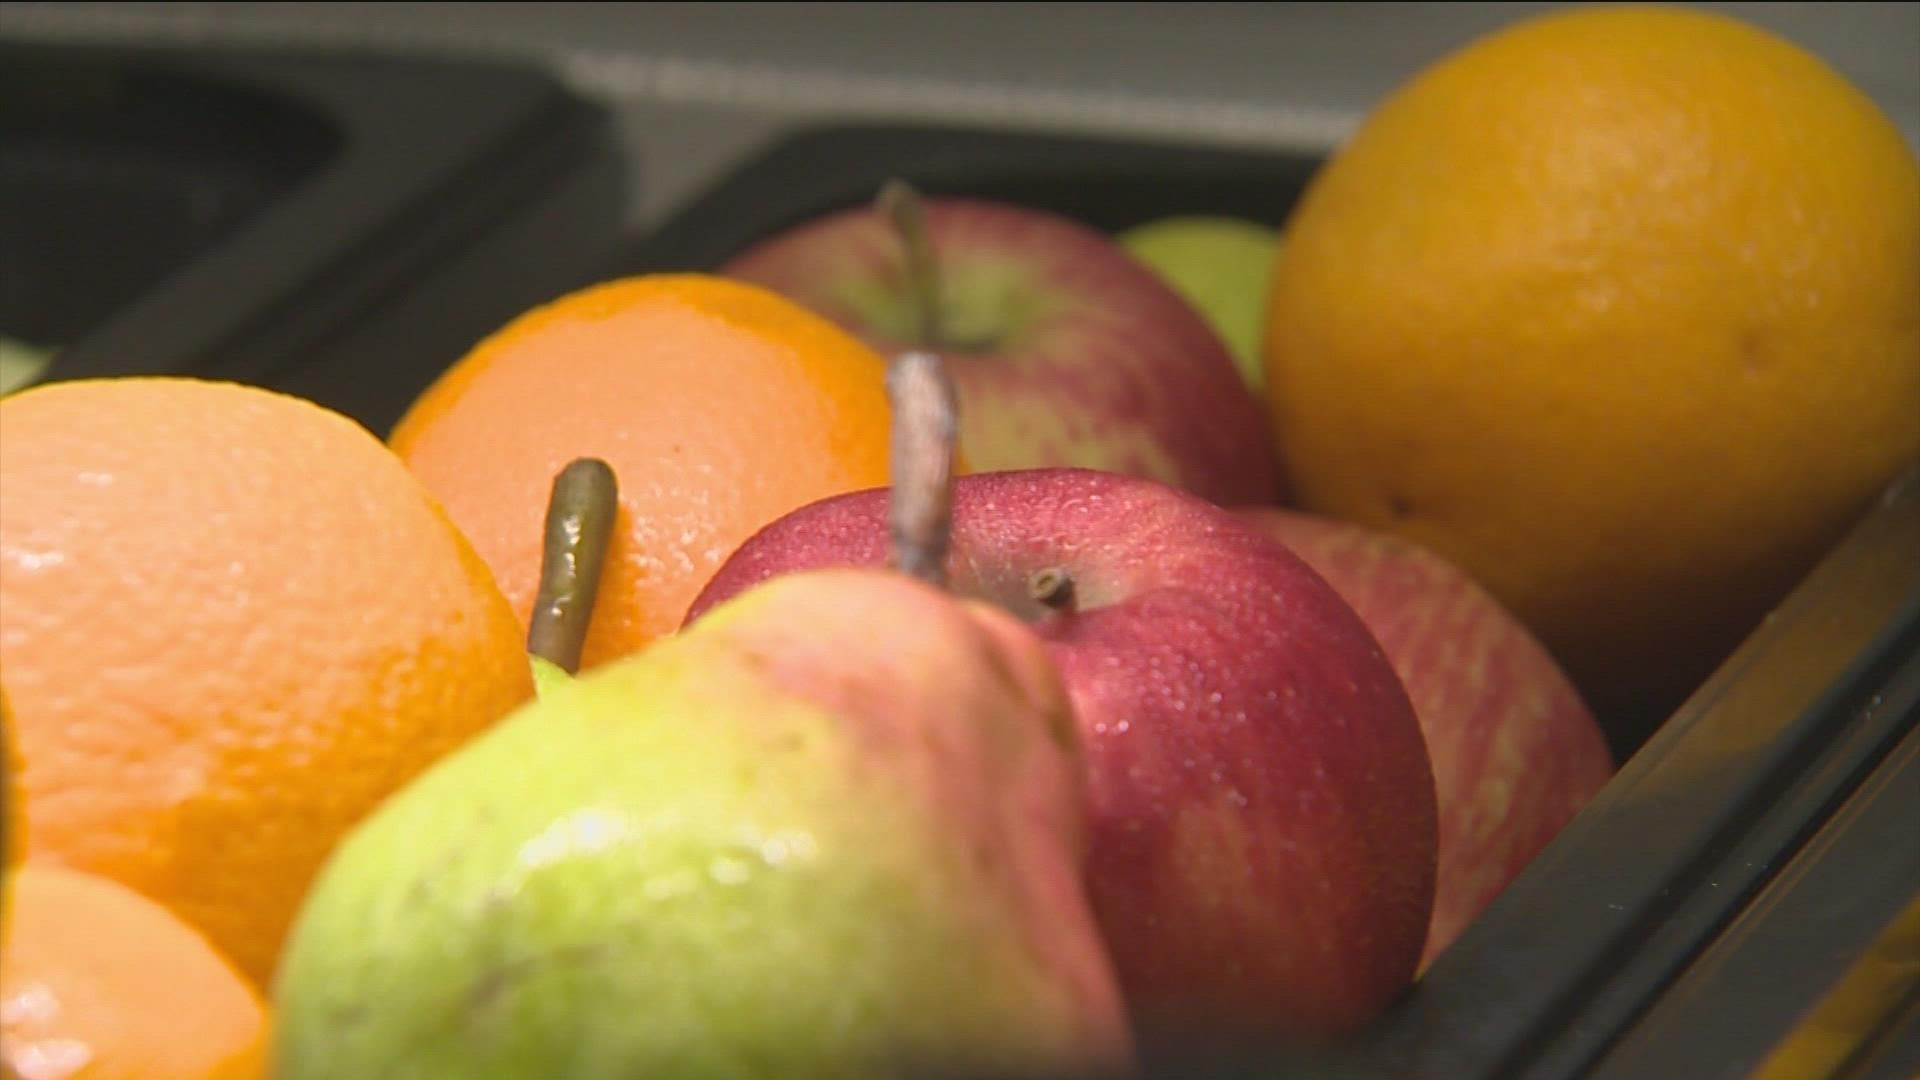 Food specialists at Hutto ISD say having a full stomach is necessary to make good grades.